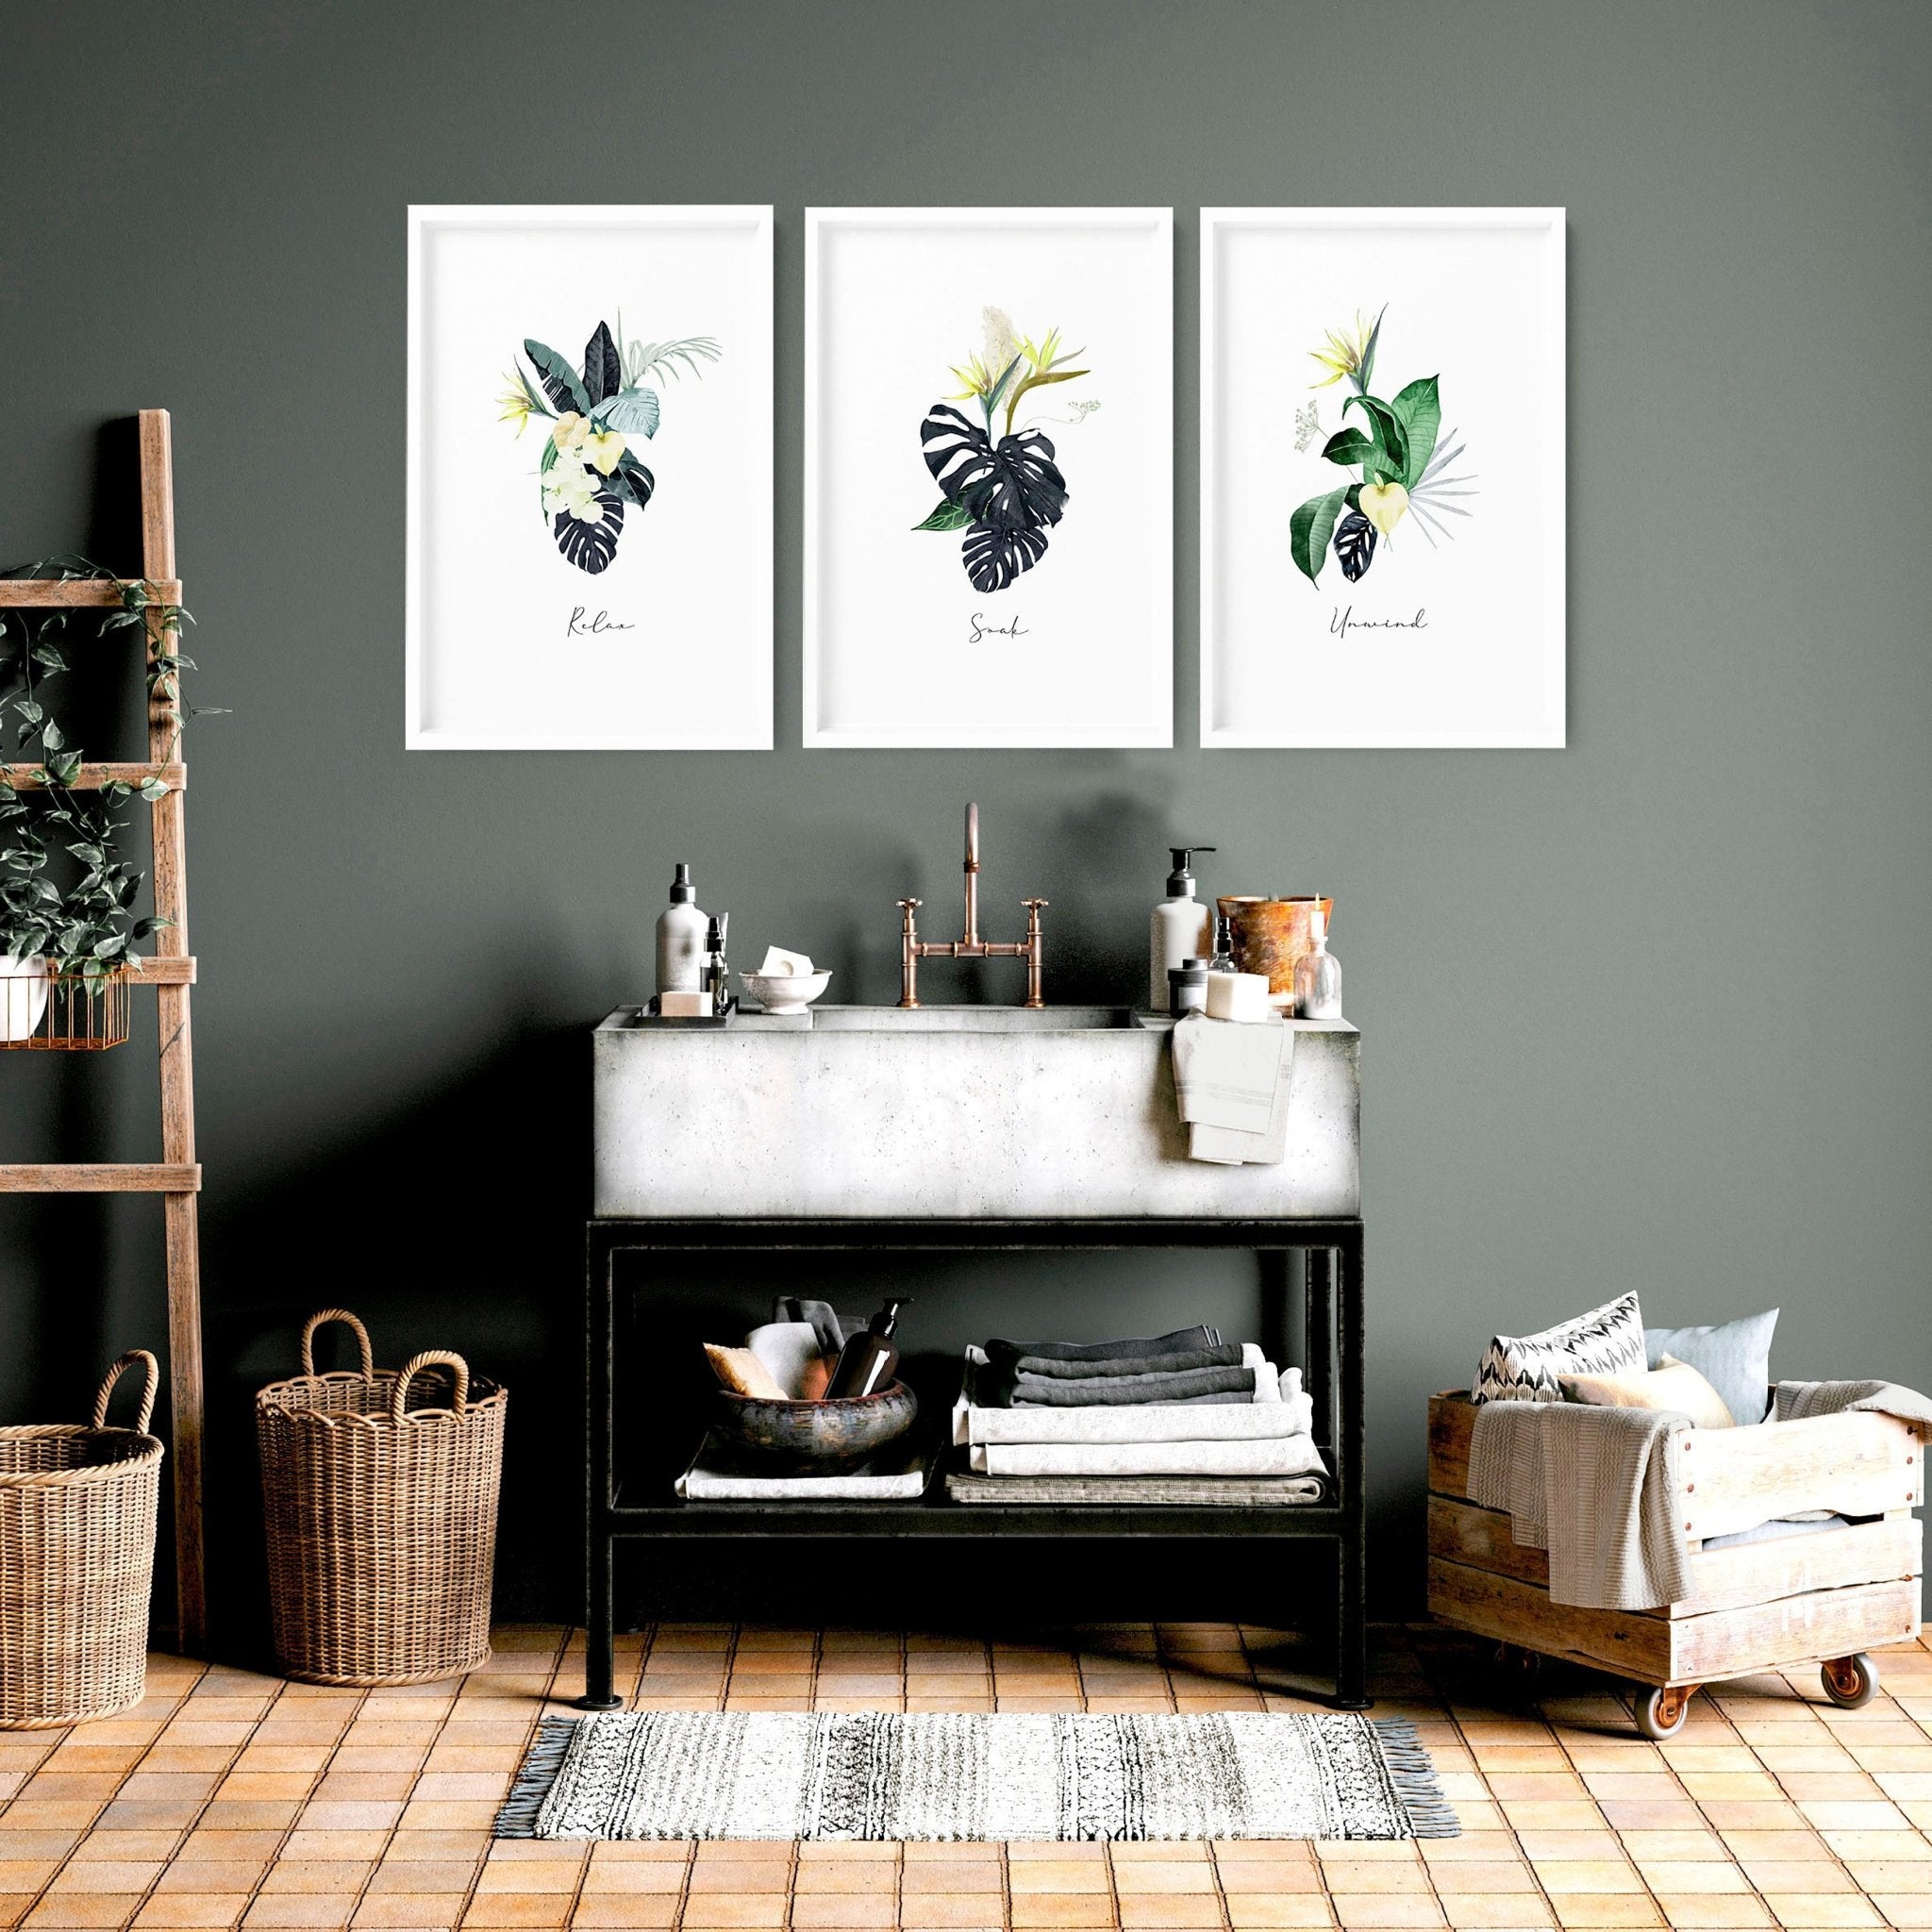 Tropical art prints for bathroom | set of 3 wall art - About Wall Art